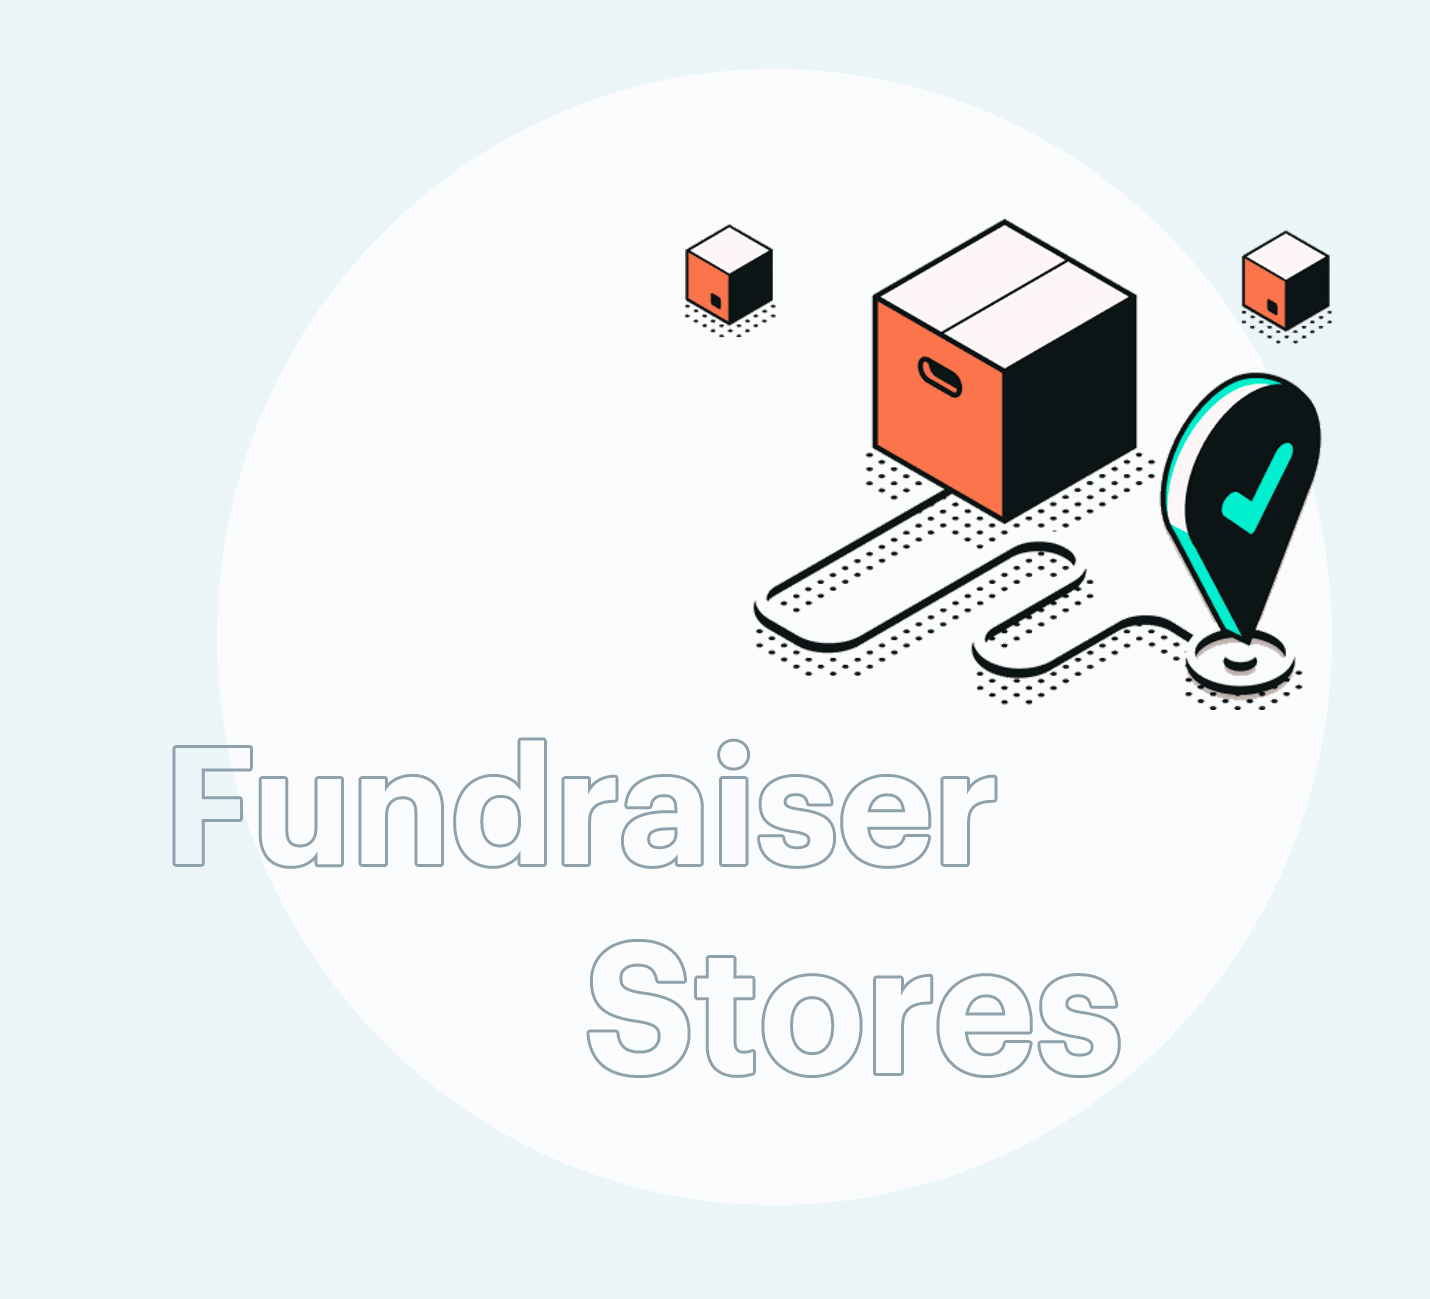 Fundraiser stores for indivuduals & organization